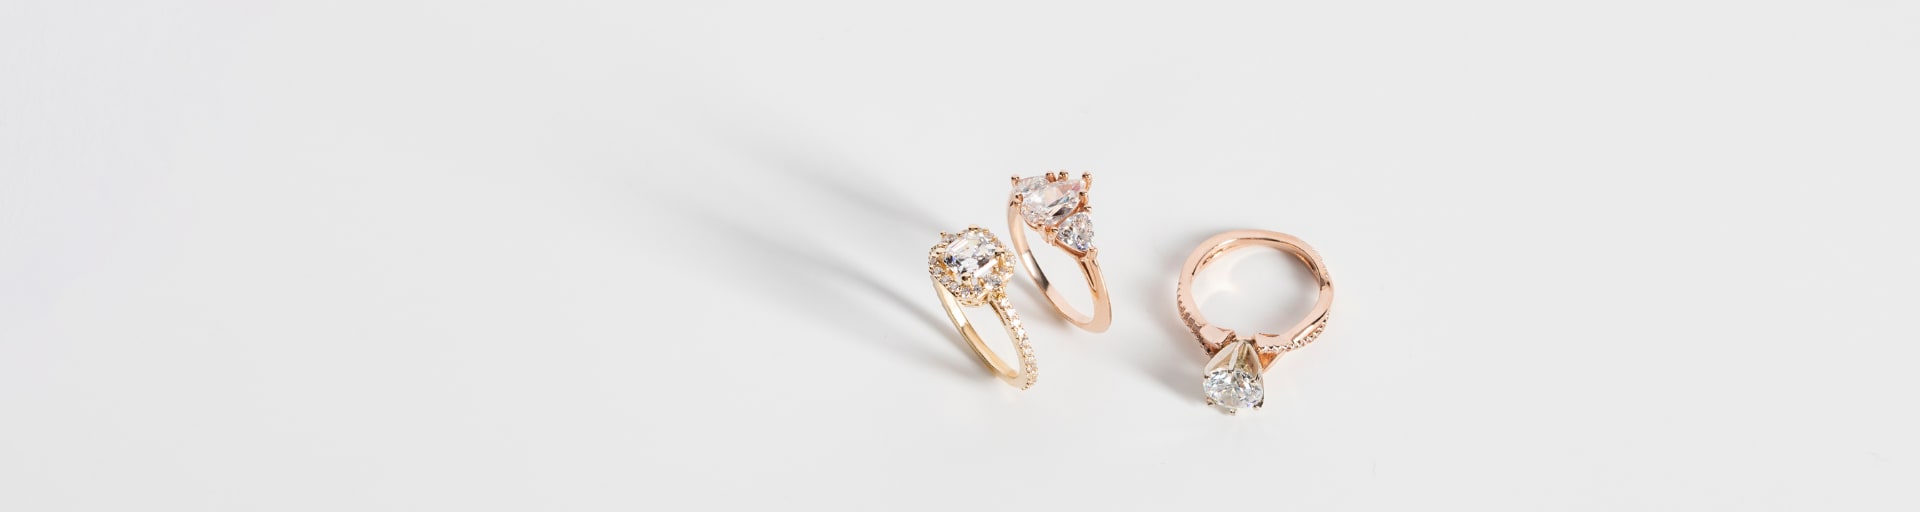 The Ultimate Guide To The Most Affordable Engagement Rings